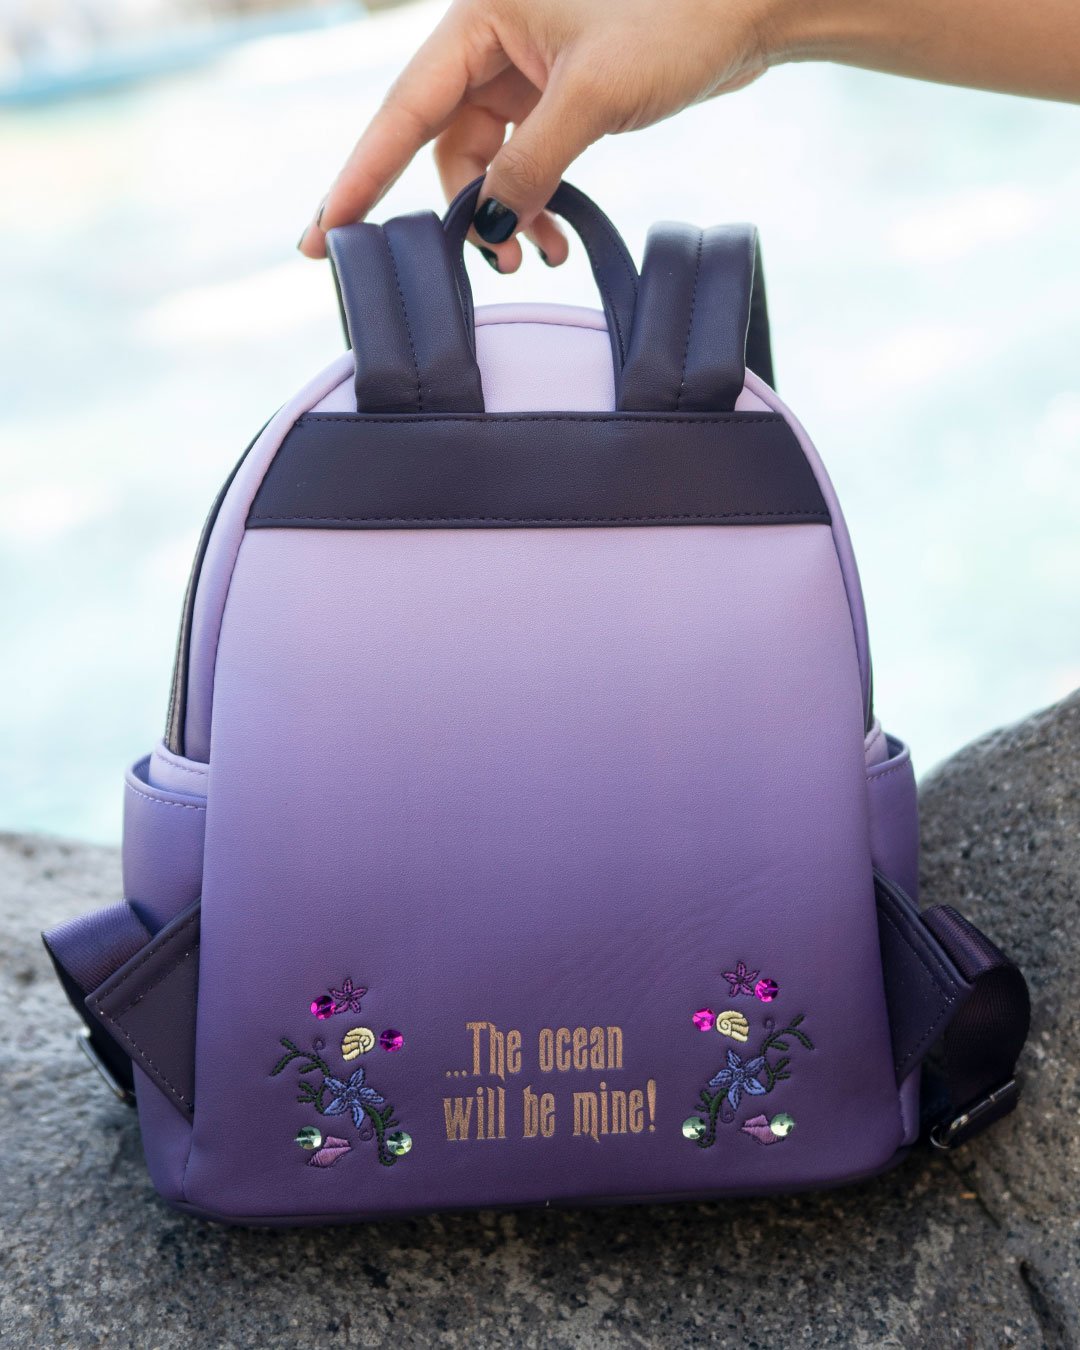 671803390935 - 707 Street Exclusive - Loungefly Disney Villains Scenes Ursula Mini Backpack - Model Holding Loungefly Bag at Disneyland